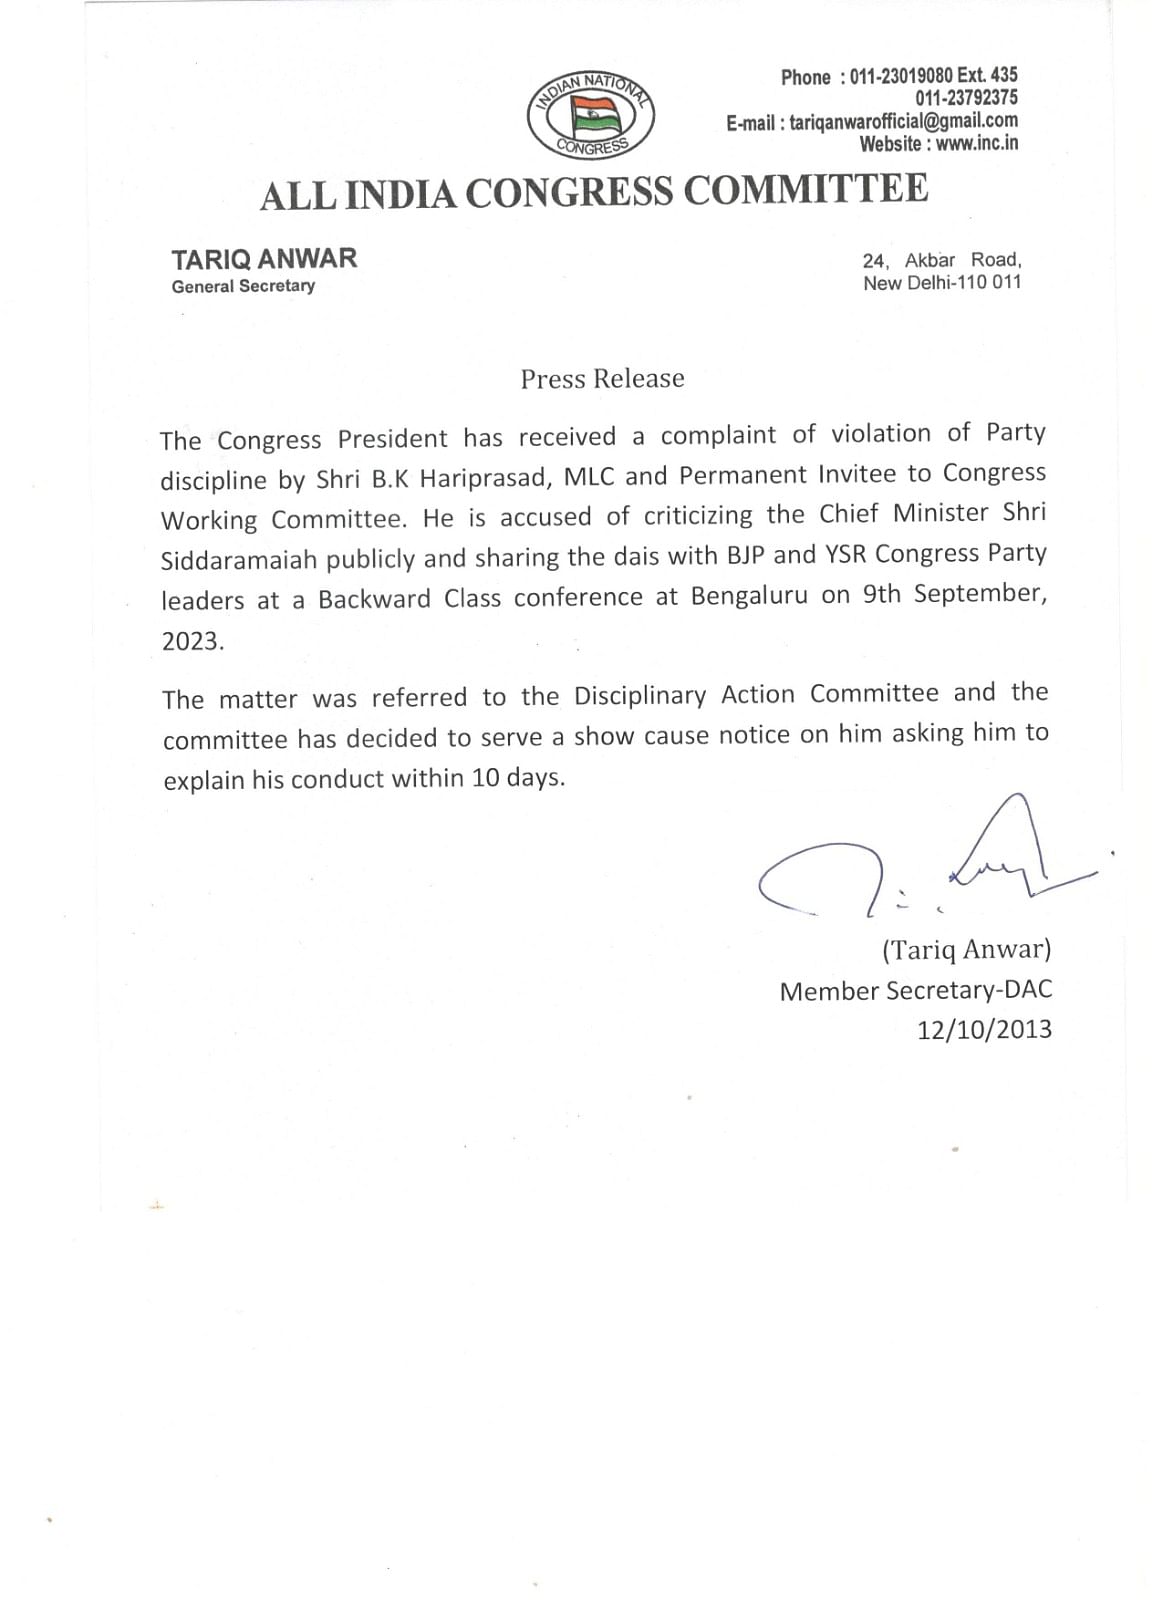 An image of a press release by the Congress announcing the show cause notice to B K Hariprasad.